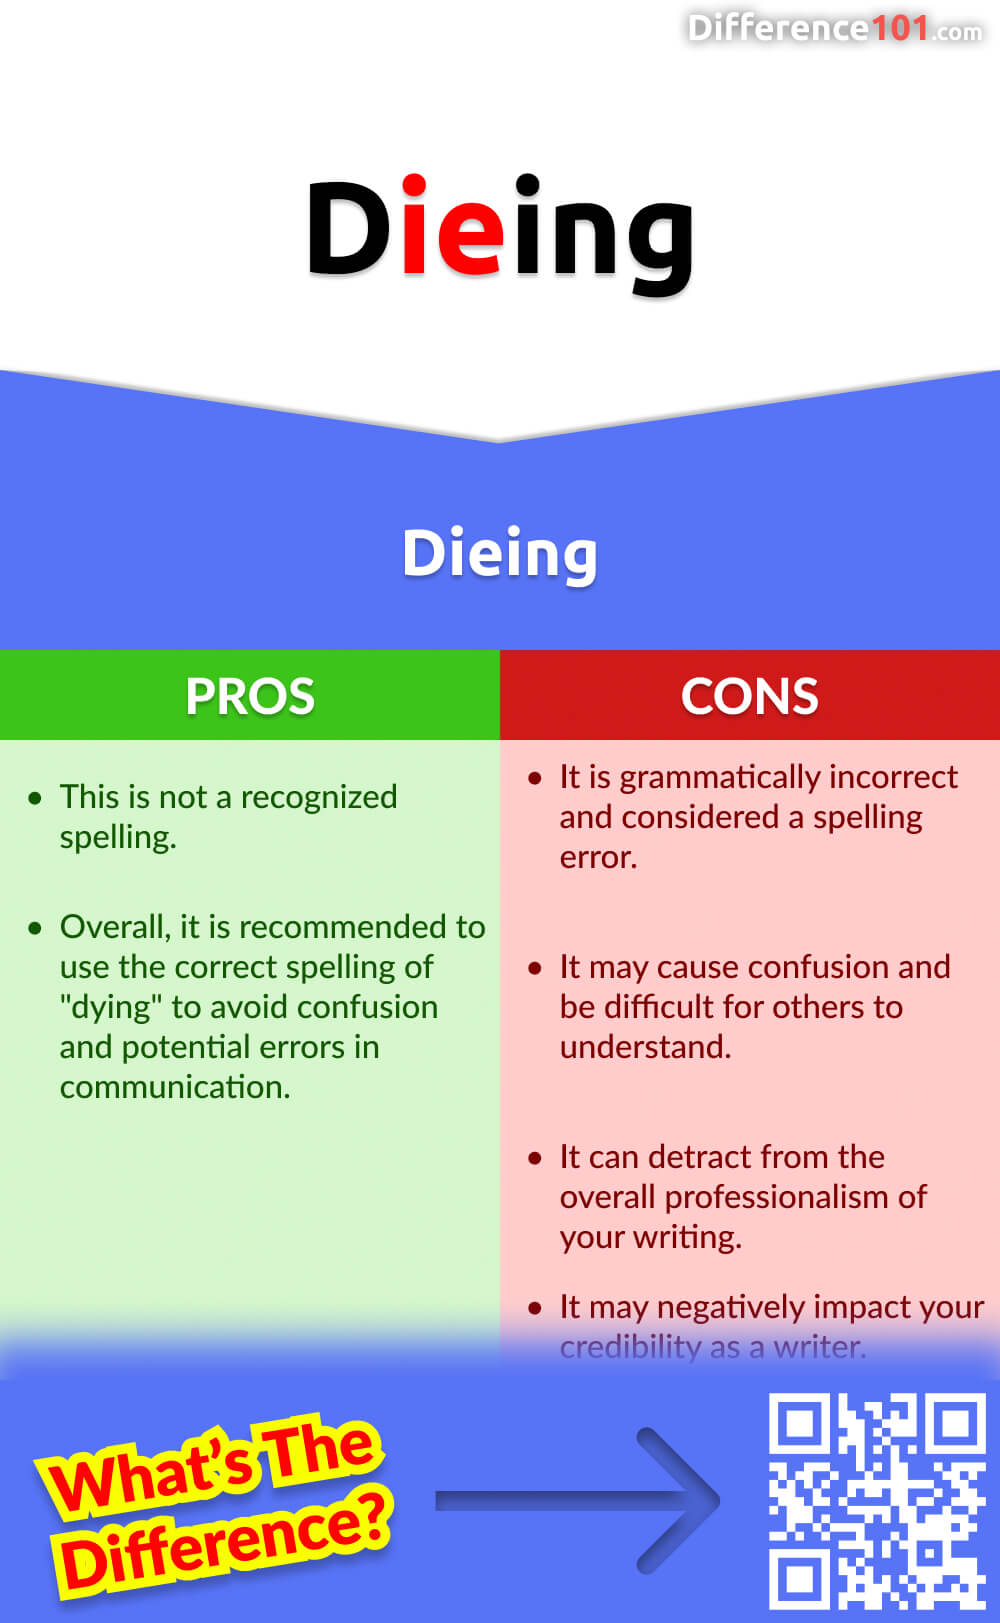 Dieing Pros & Cons